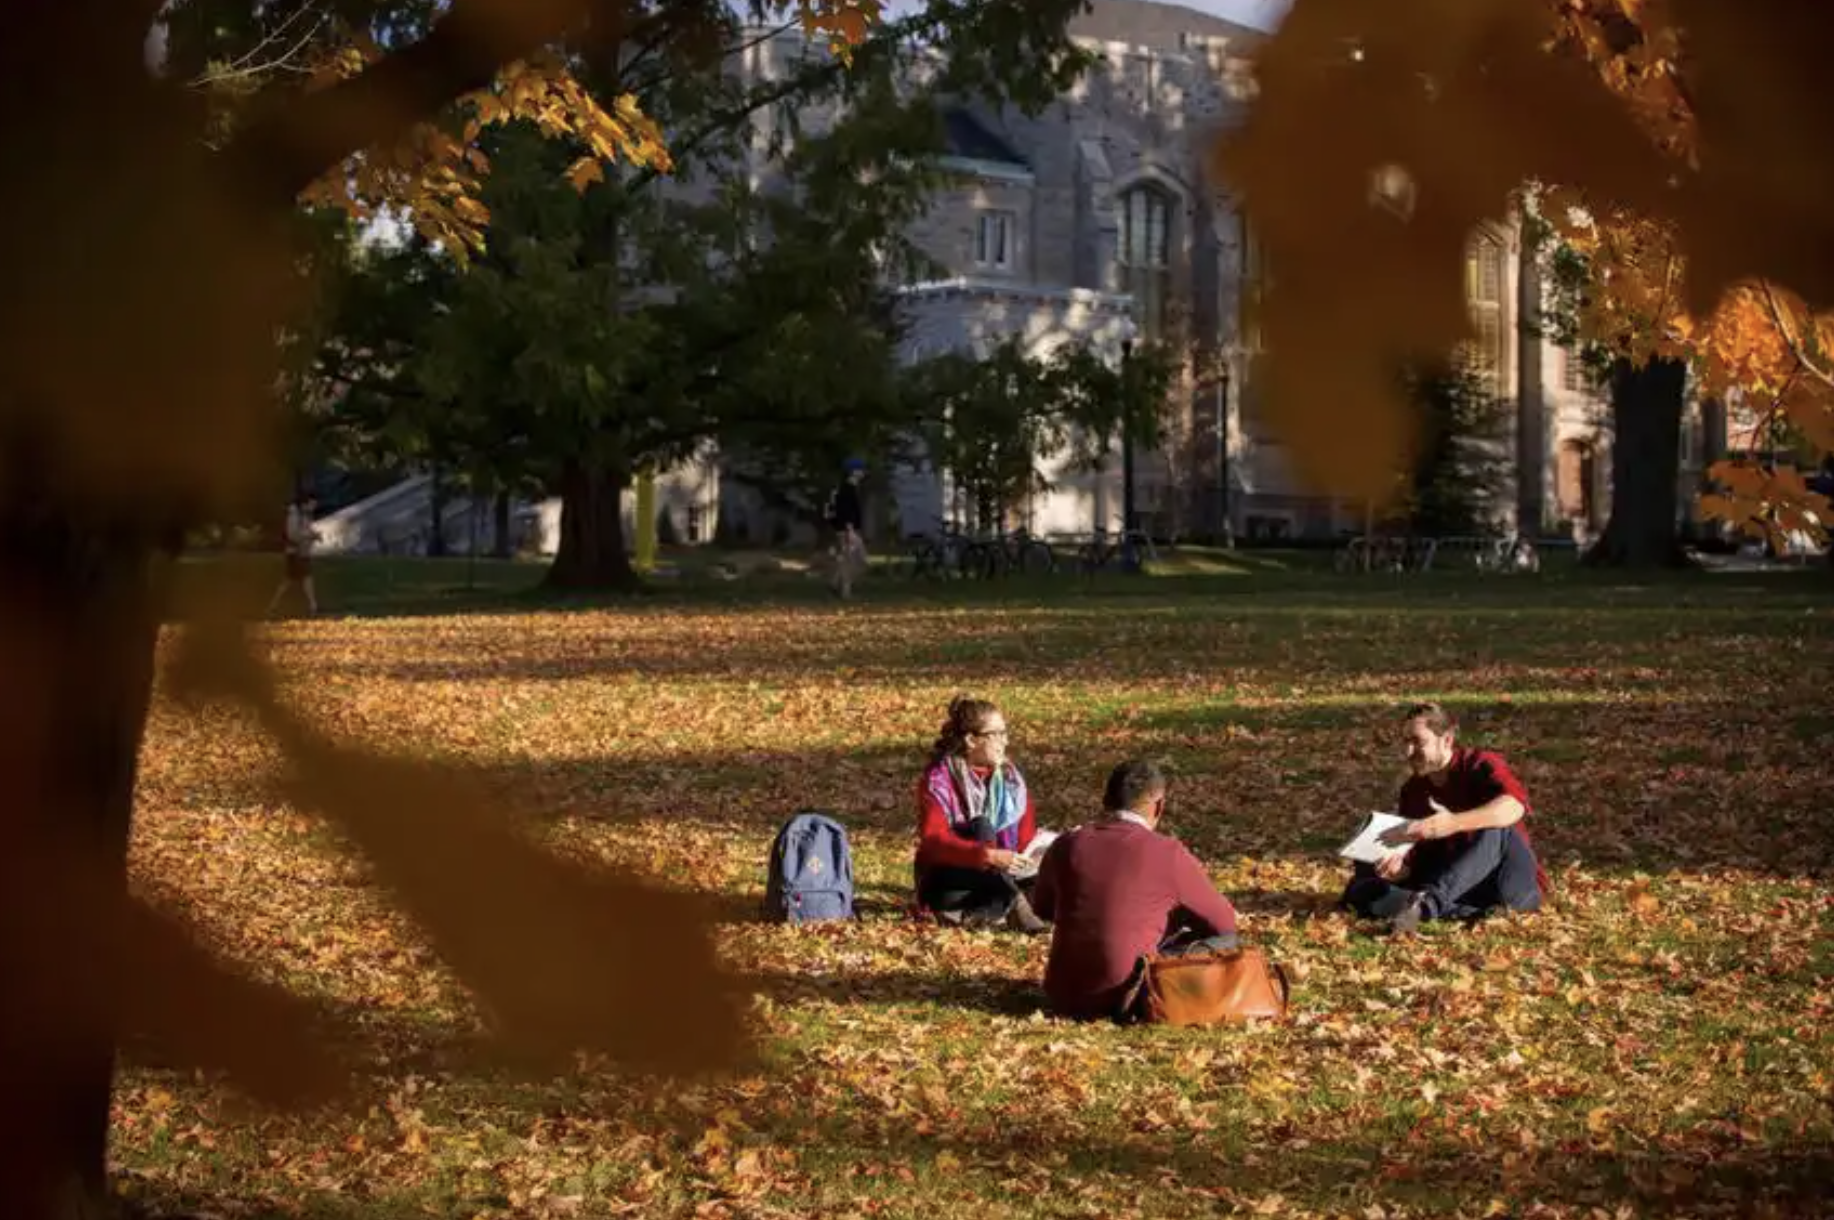 A group of students seated outside on U of G campus in fall